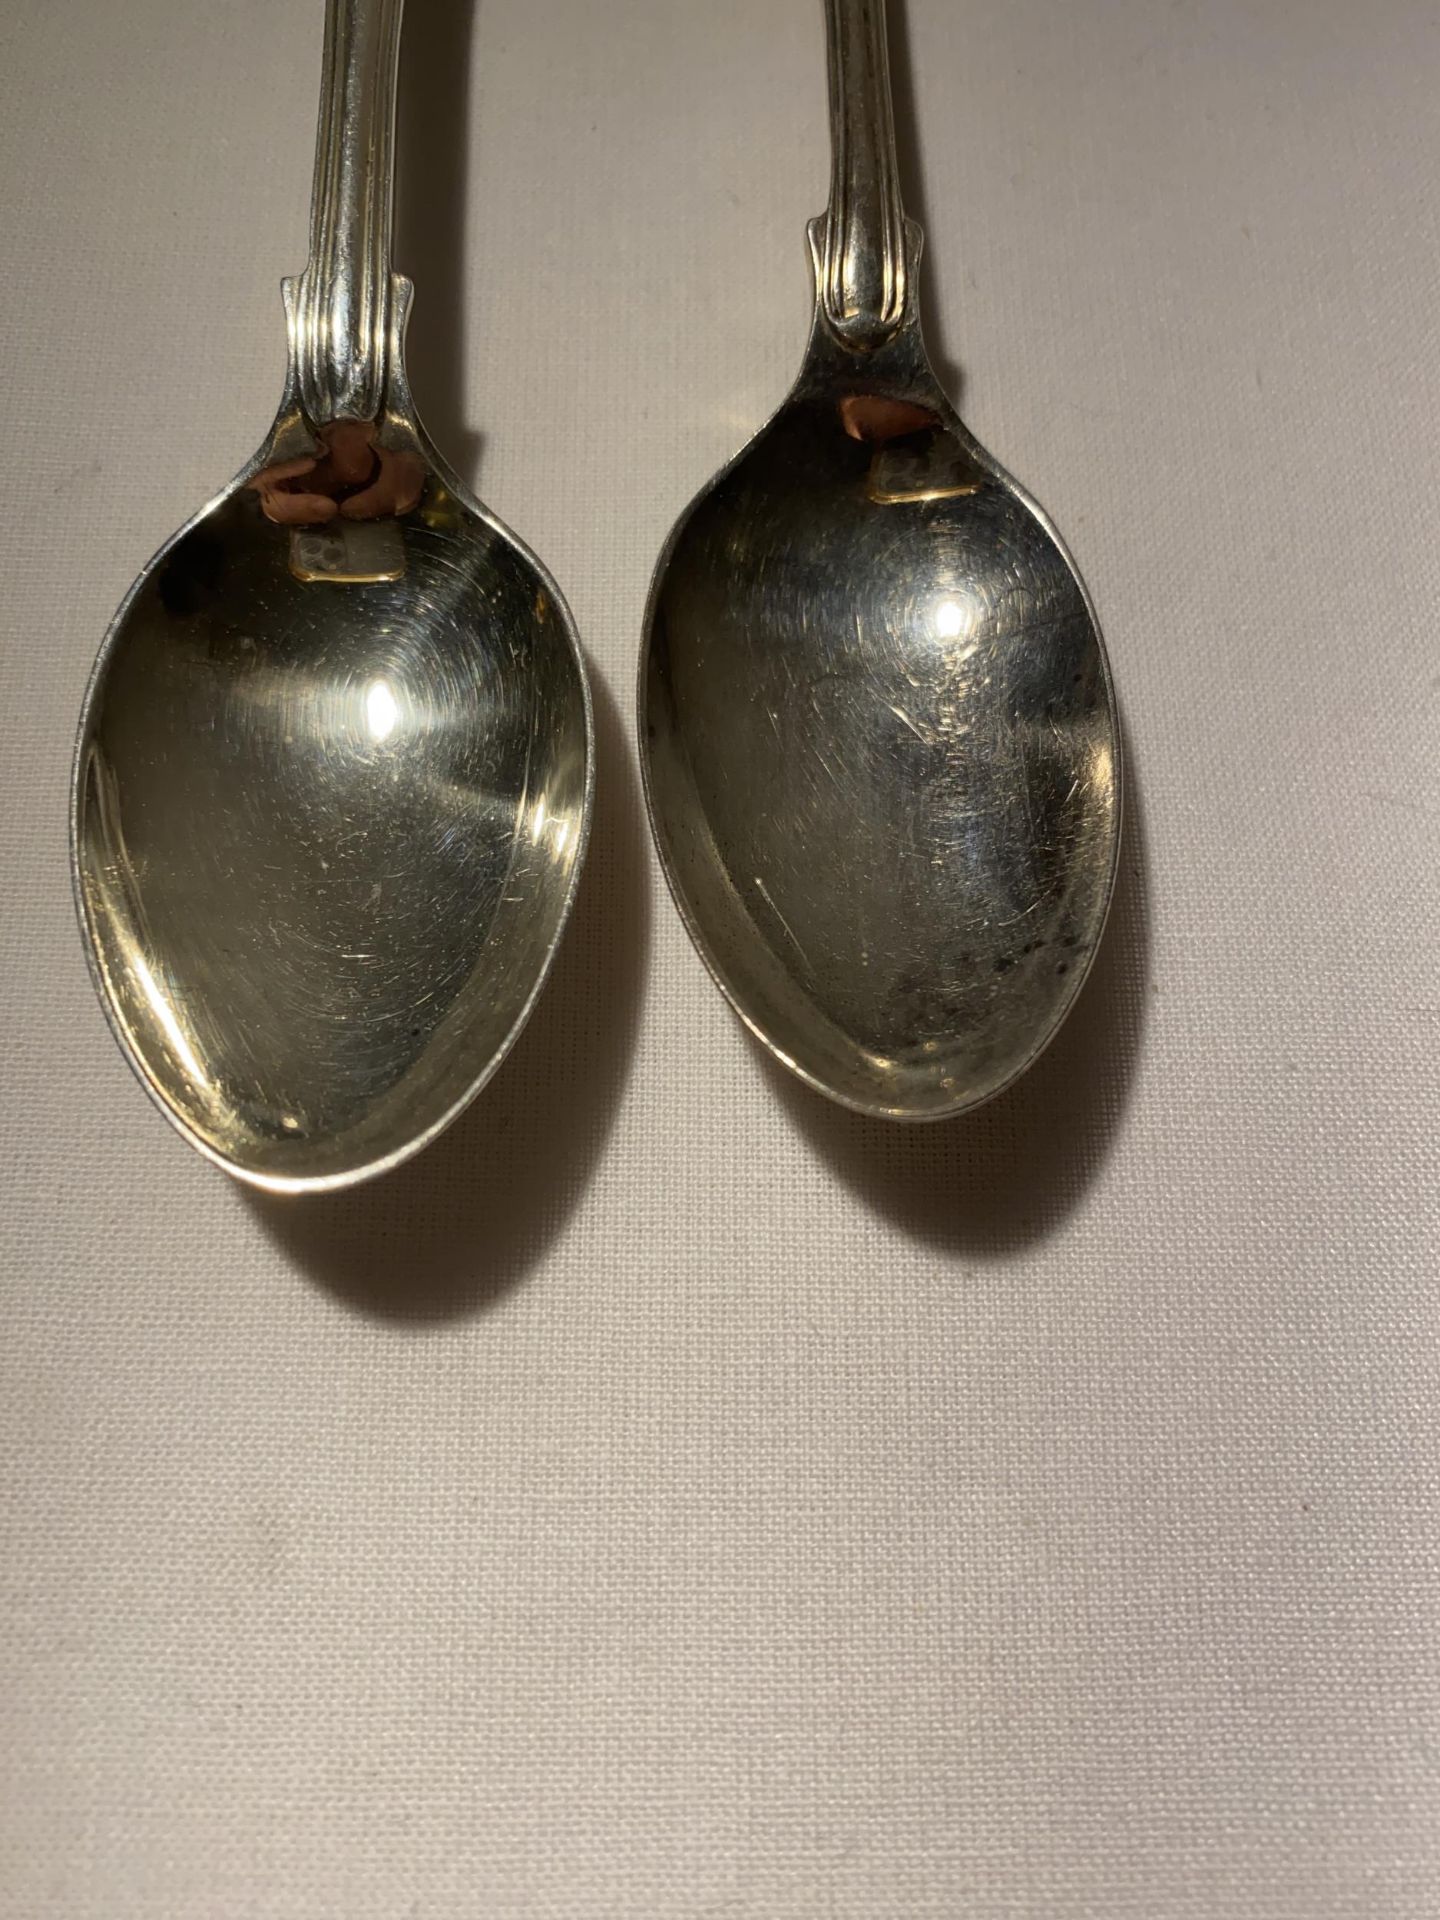 TWO SHEFFIELD HALLMARKED SILVER SPOONS, EARLIEST BEING 1925, MAKER WILLIAM HUTTON & SONS LTD, - Image 4 of 18